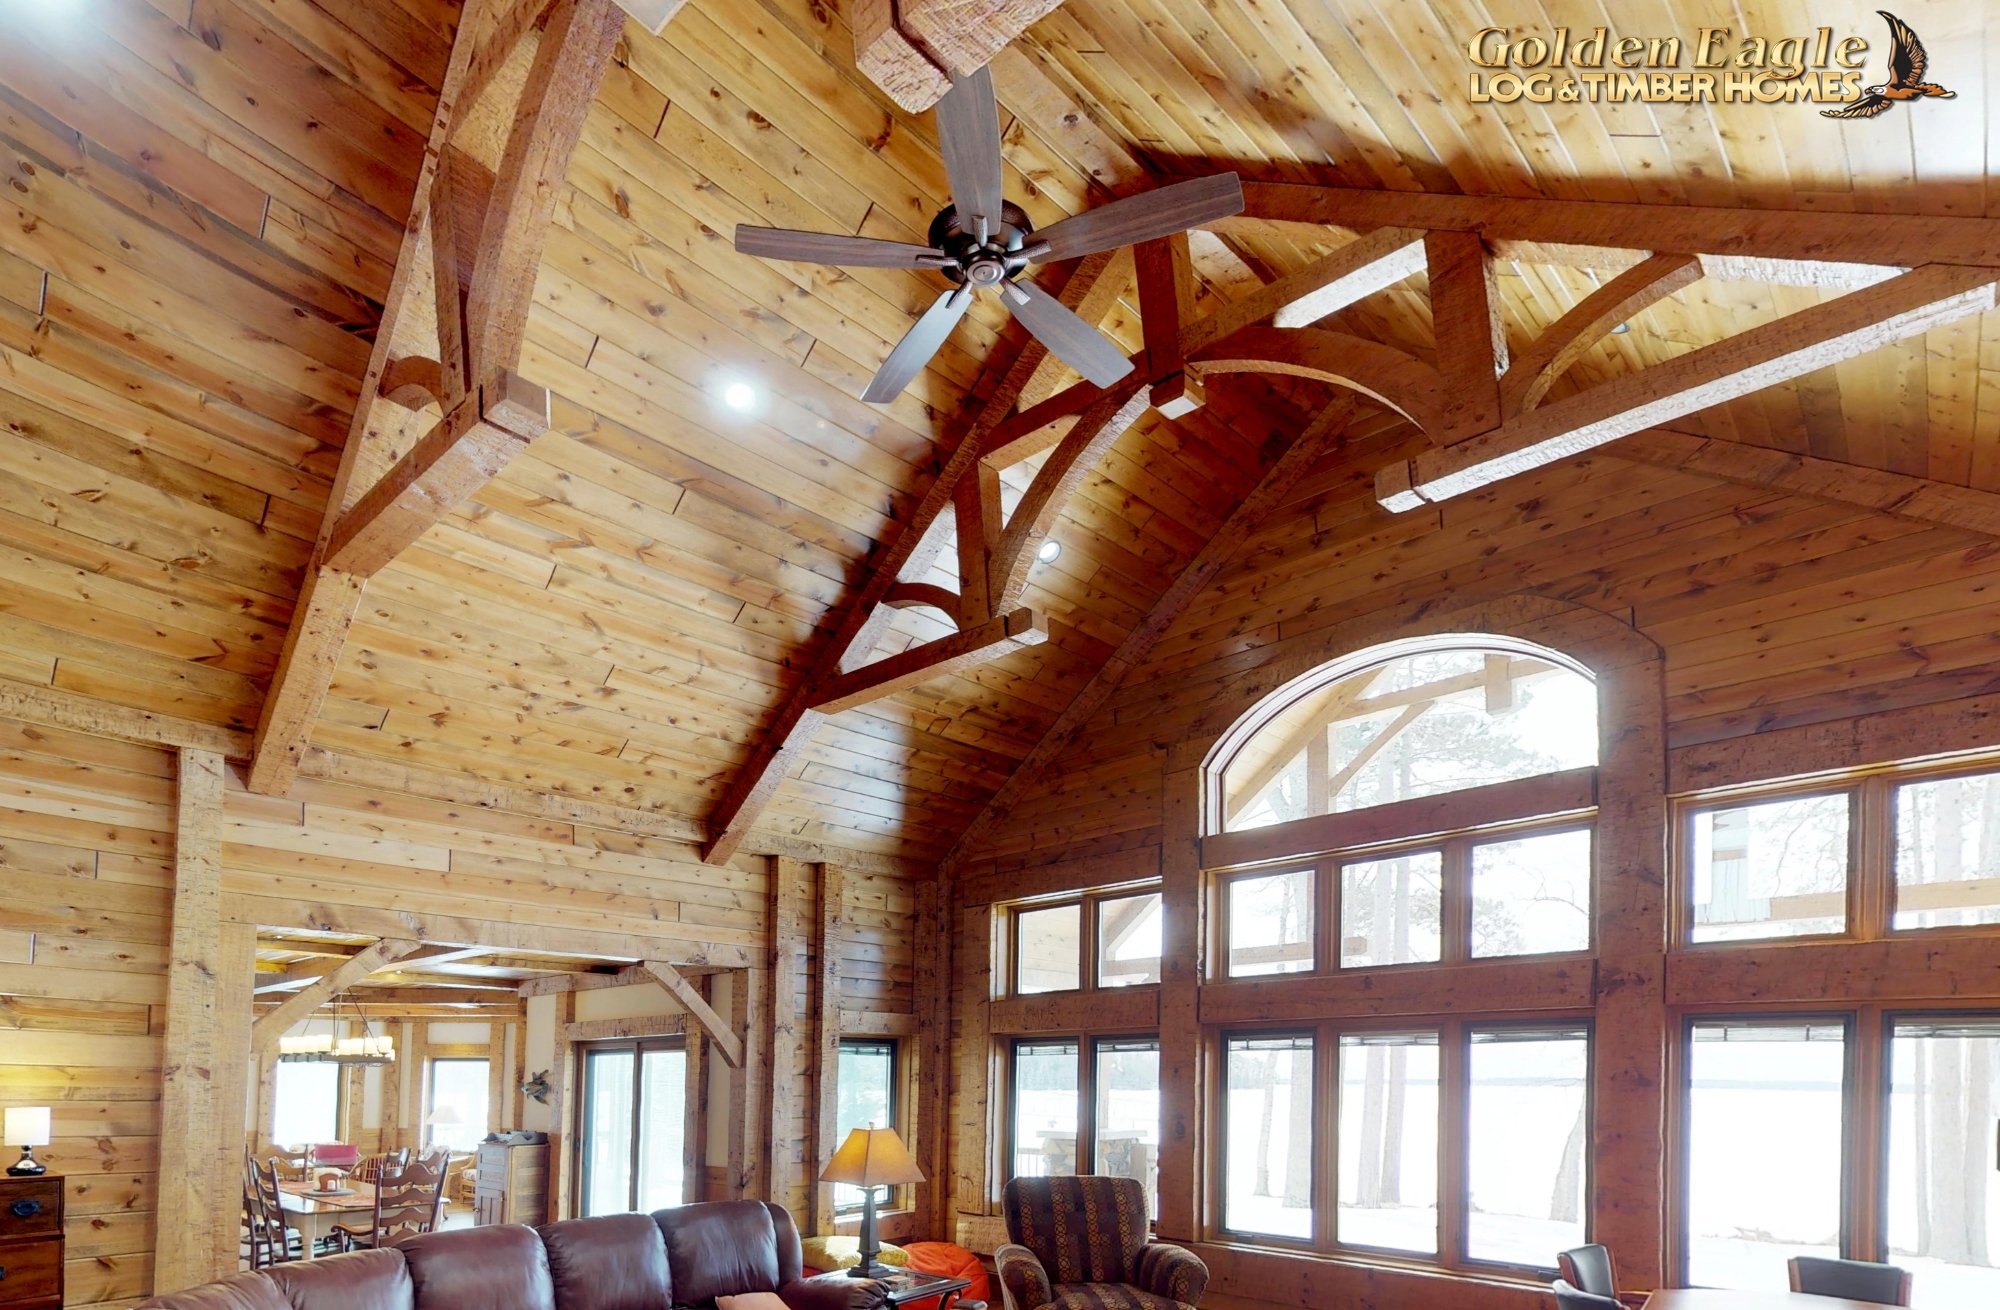 Golden Eagle Log And Timber Homes Exposed Beam Timber Frame